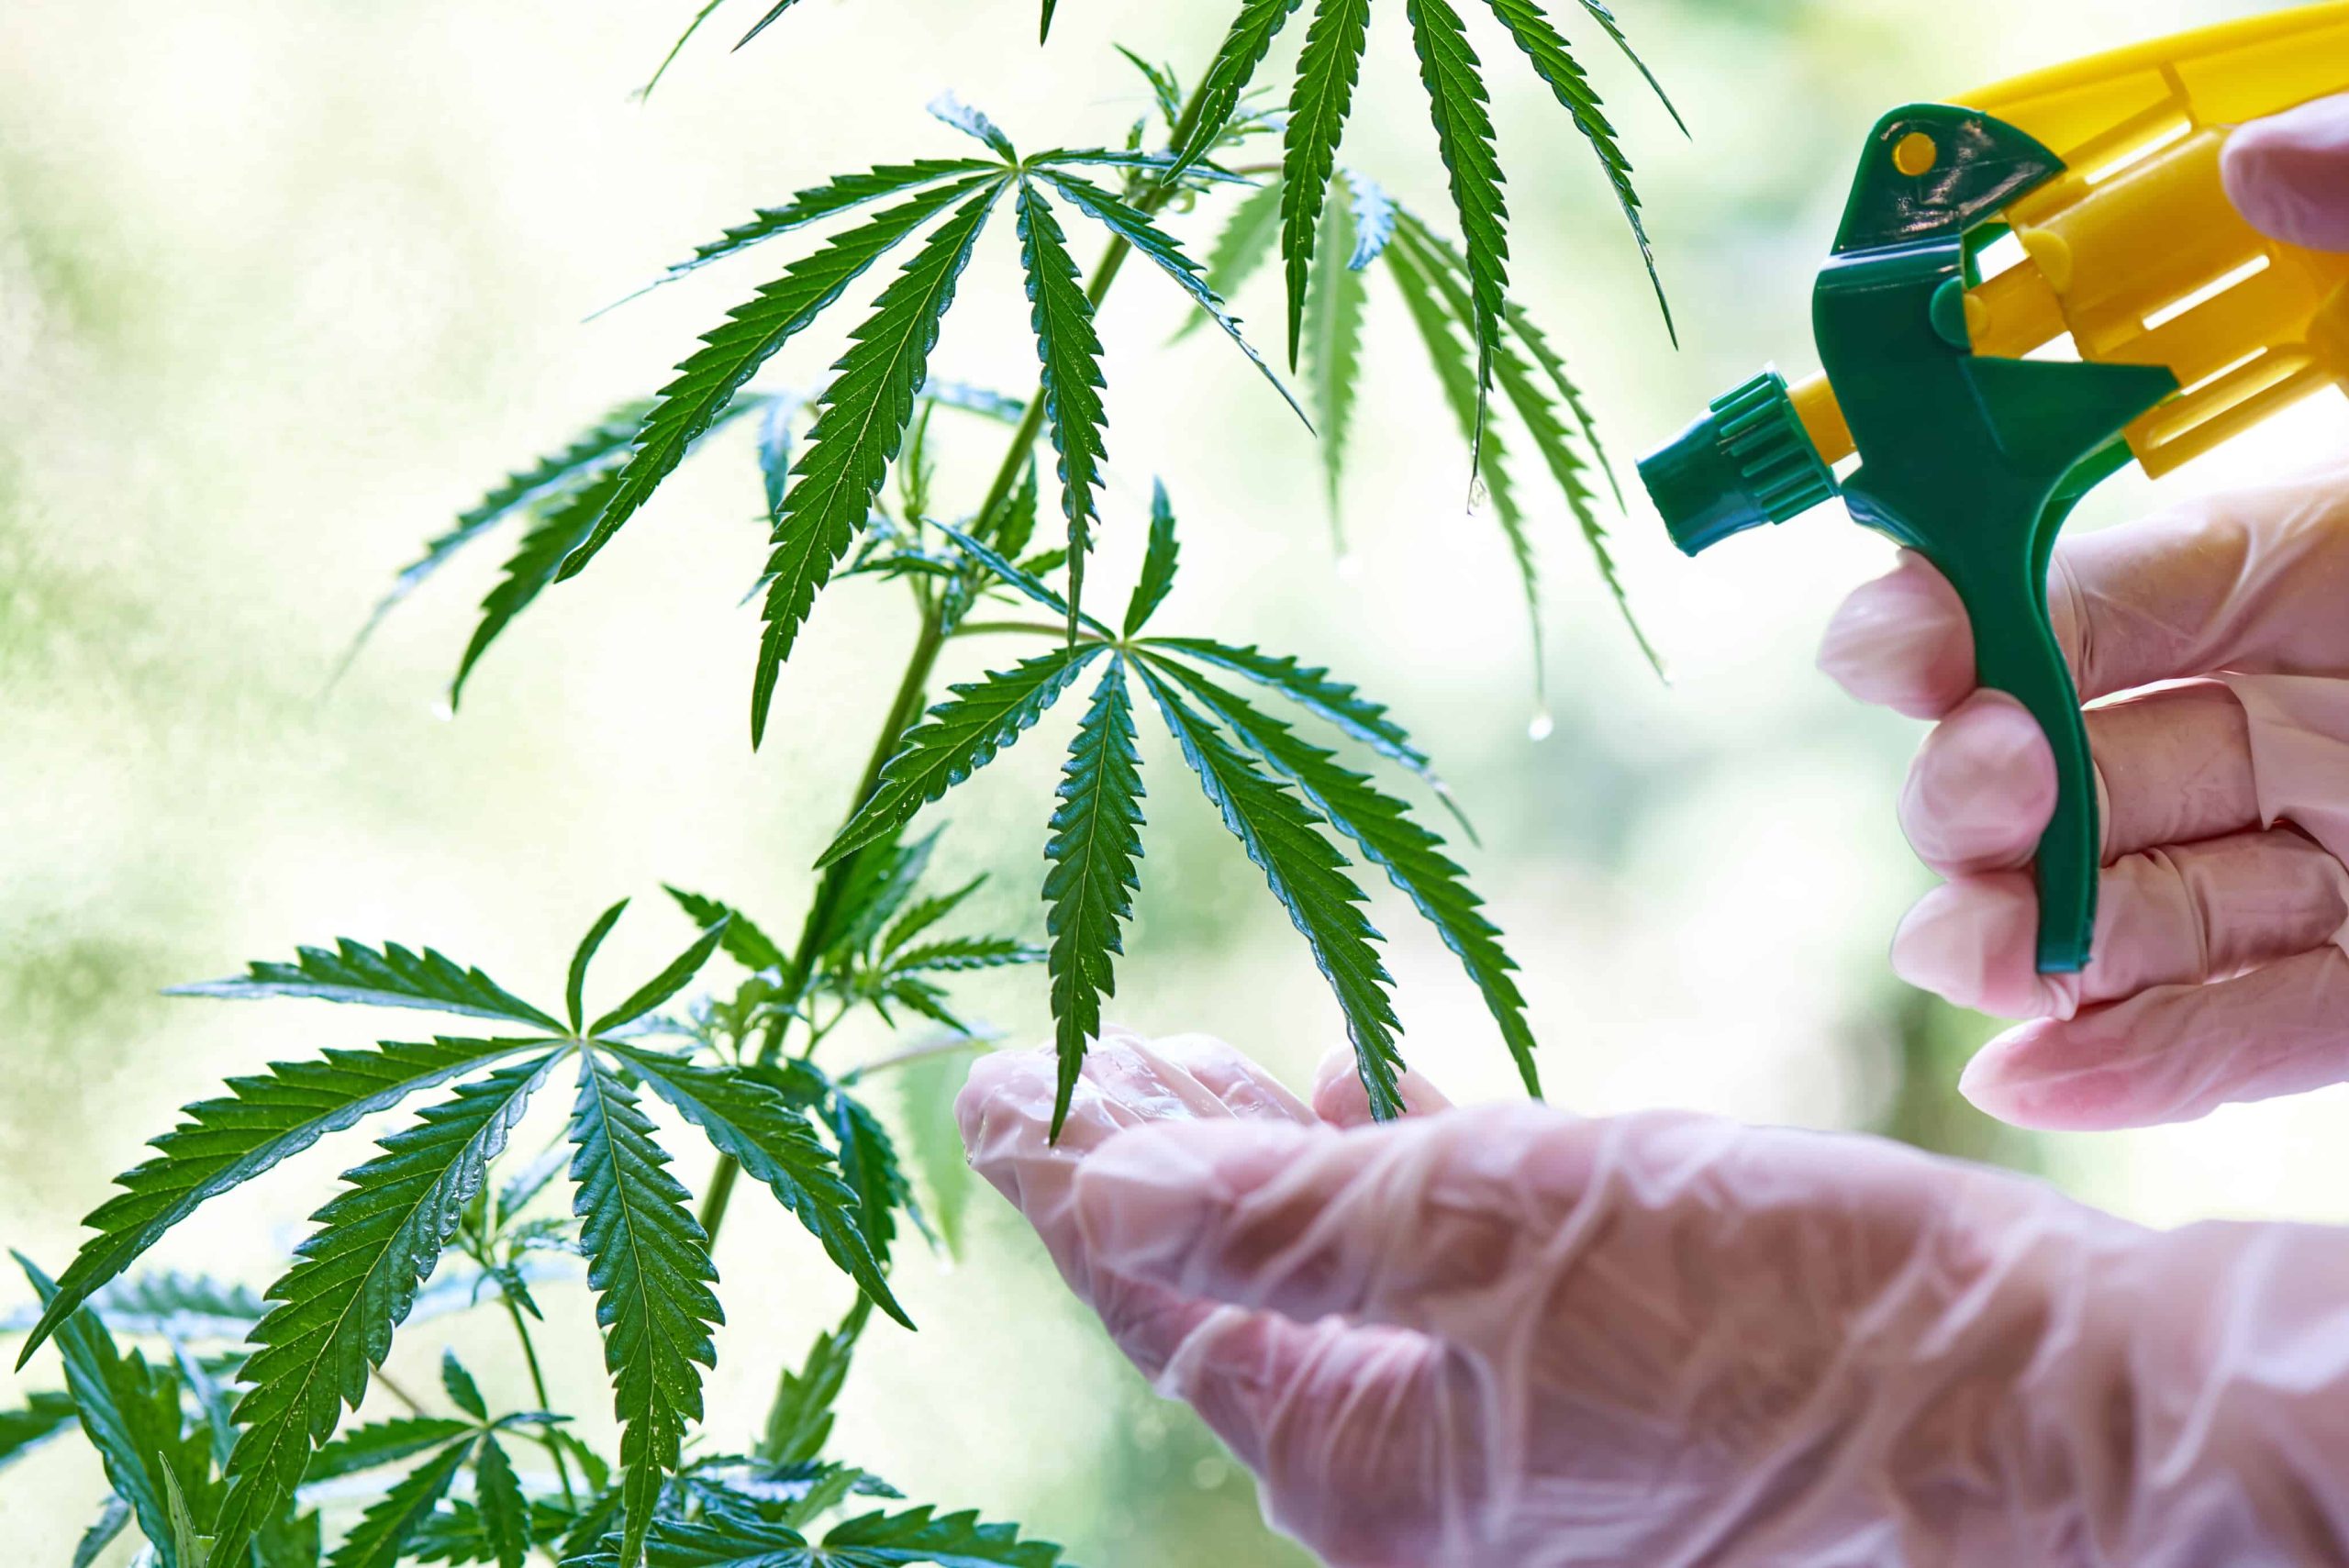 Hemp Cannabinoids Could Be Source of New Pesticides